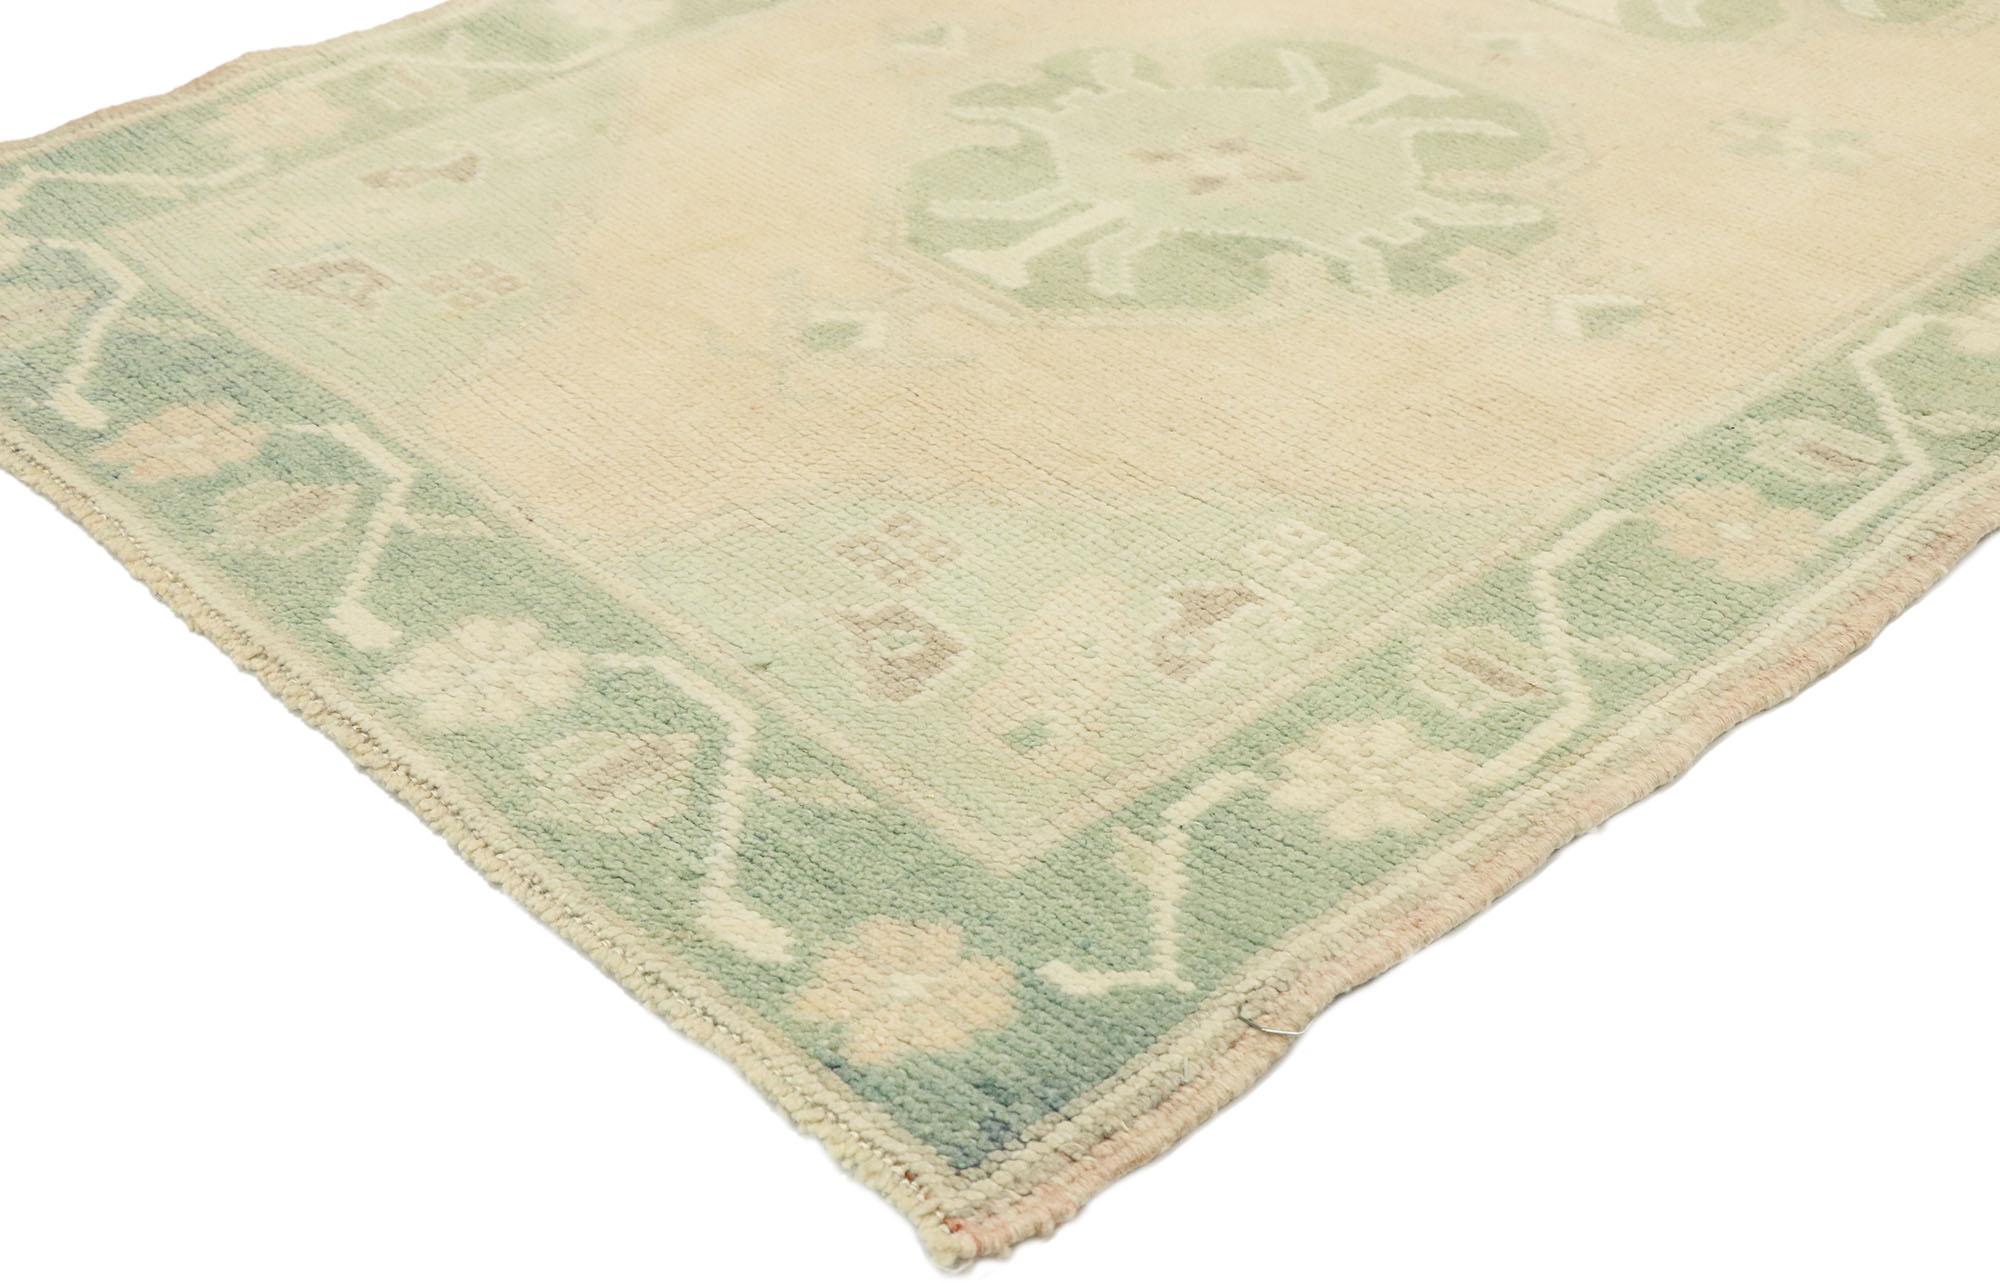 52928 vintage Turkish Oushak runner with romantic Gustavian and Swedish Rococo style 02'11 x 06'10. Take a timeless, tailored design, mix in a dash of romantic connotations and antique-washed colors to get this fresh look that’s as comfortable as it